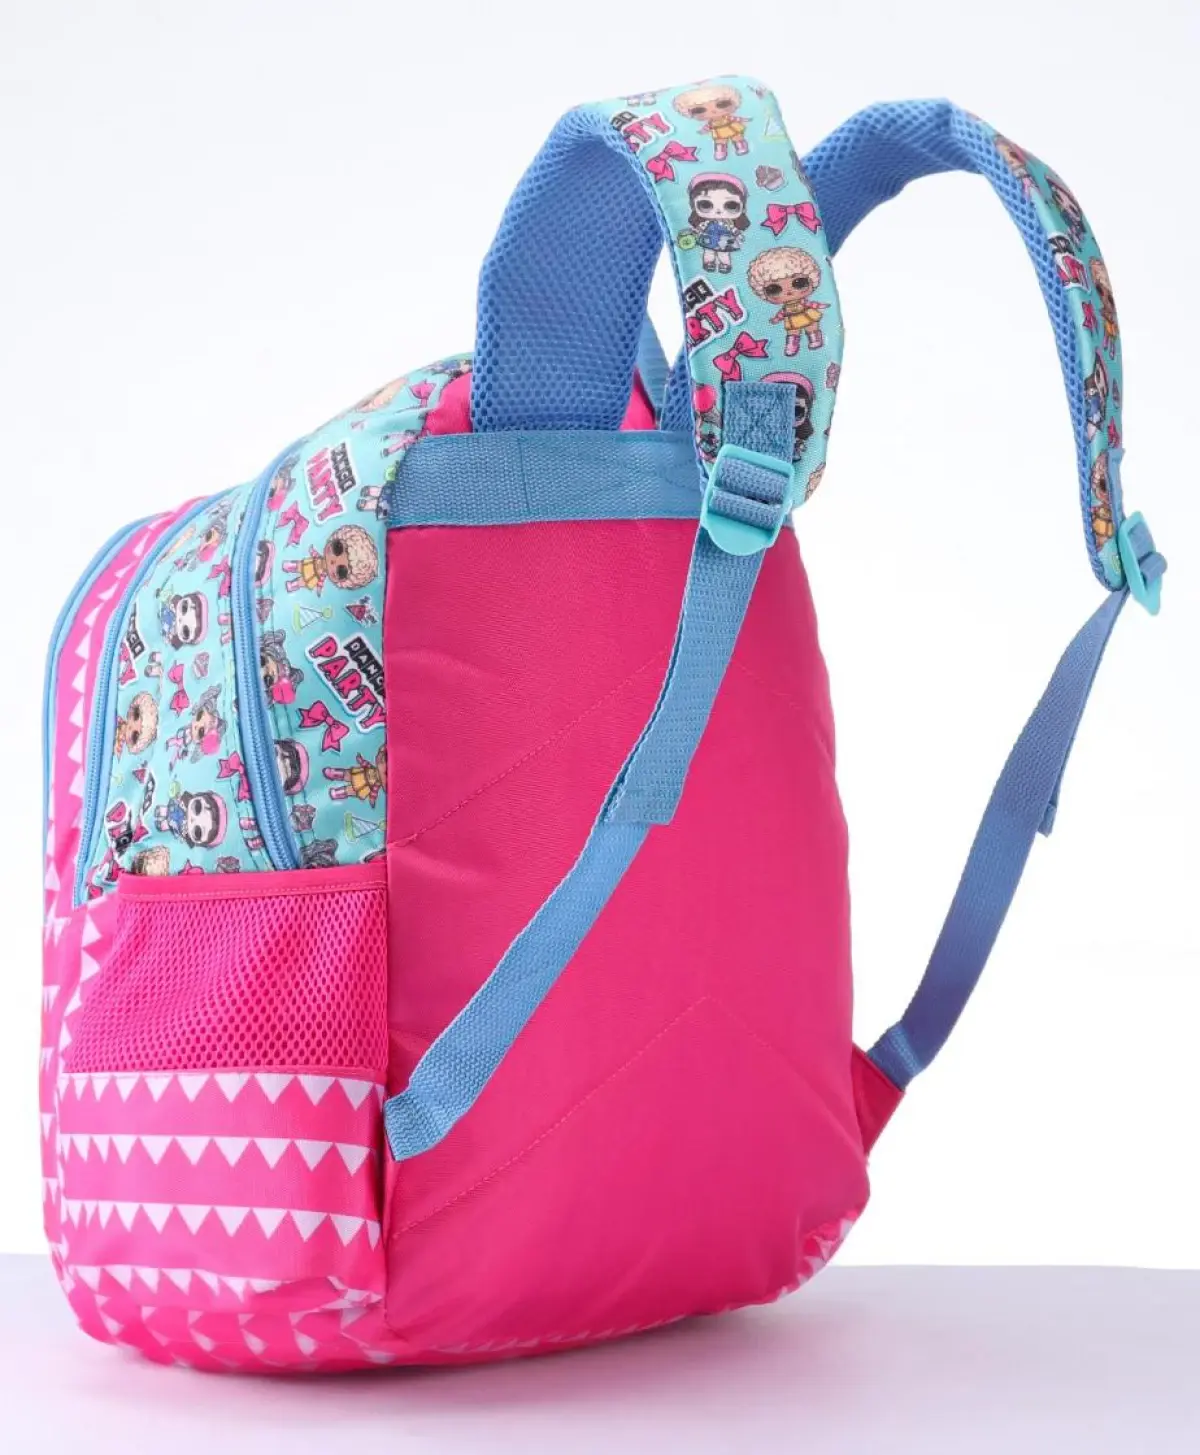 Striders 16 inches LOL Surprise School Bag - Trendy Style for Little Fashionistas Multicolor For Kids Ages 6Y+